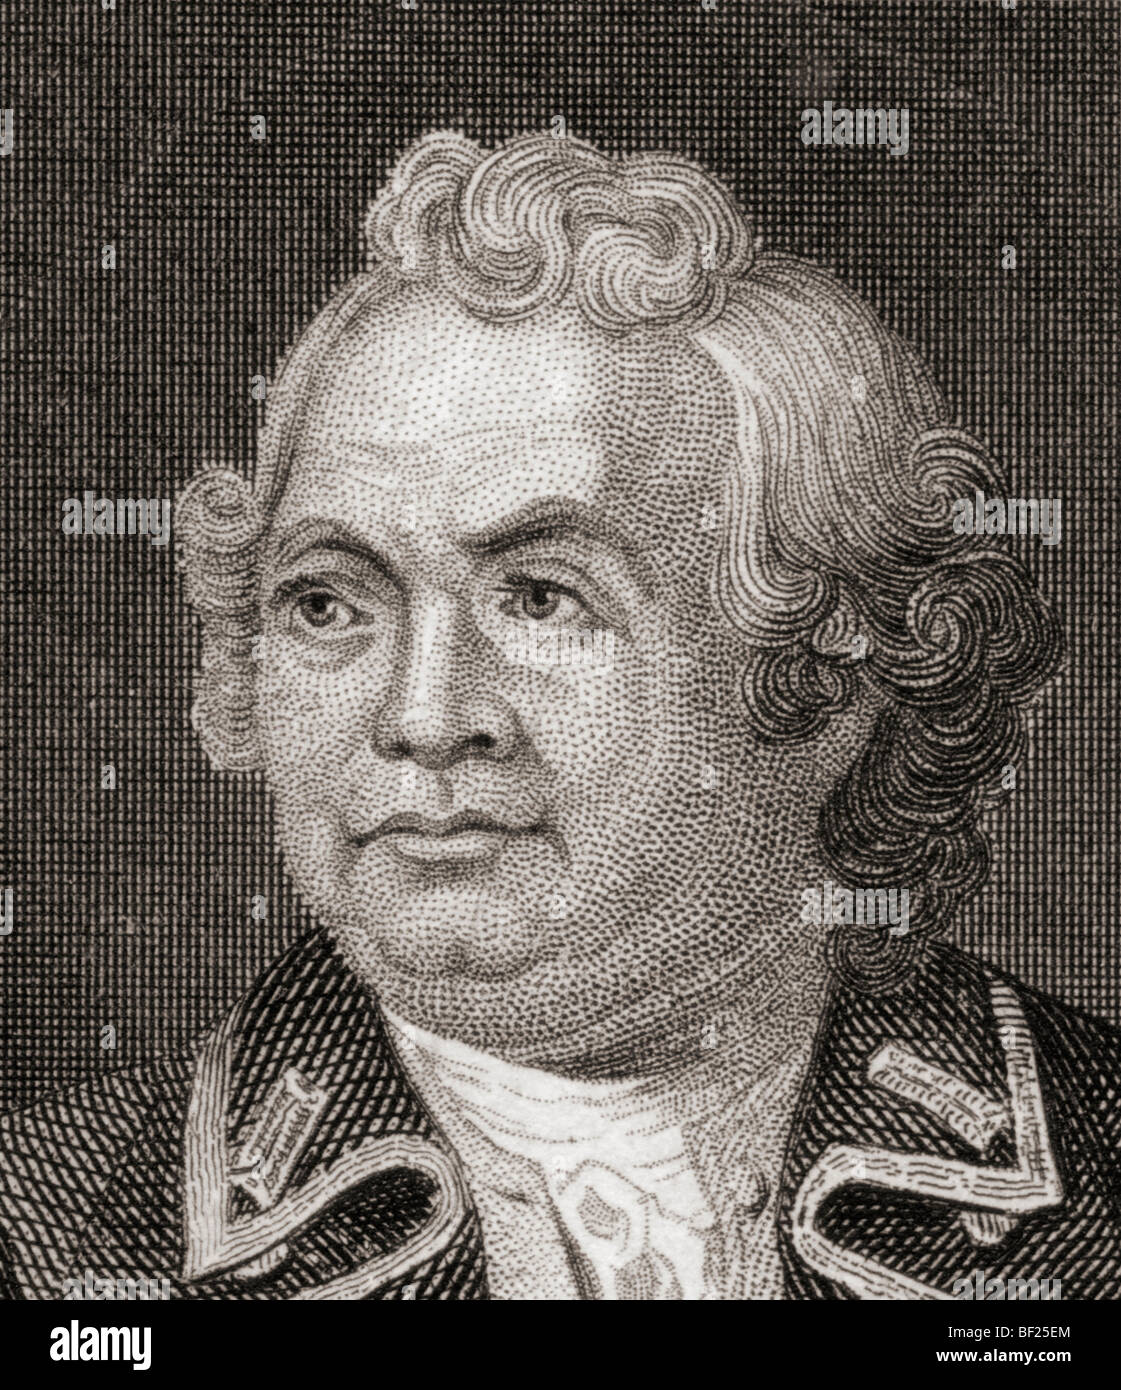 Israel Putnam, 1718 to 1790. American army general during the American Revolutionary War. Stock Photo